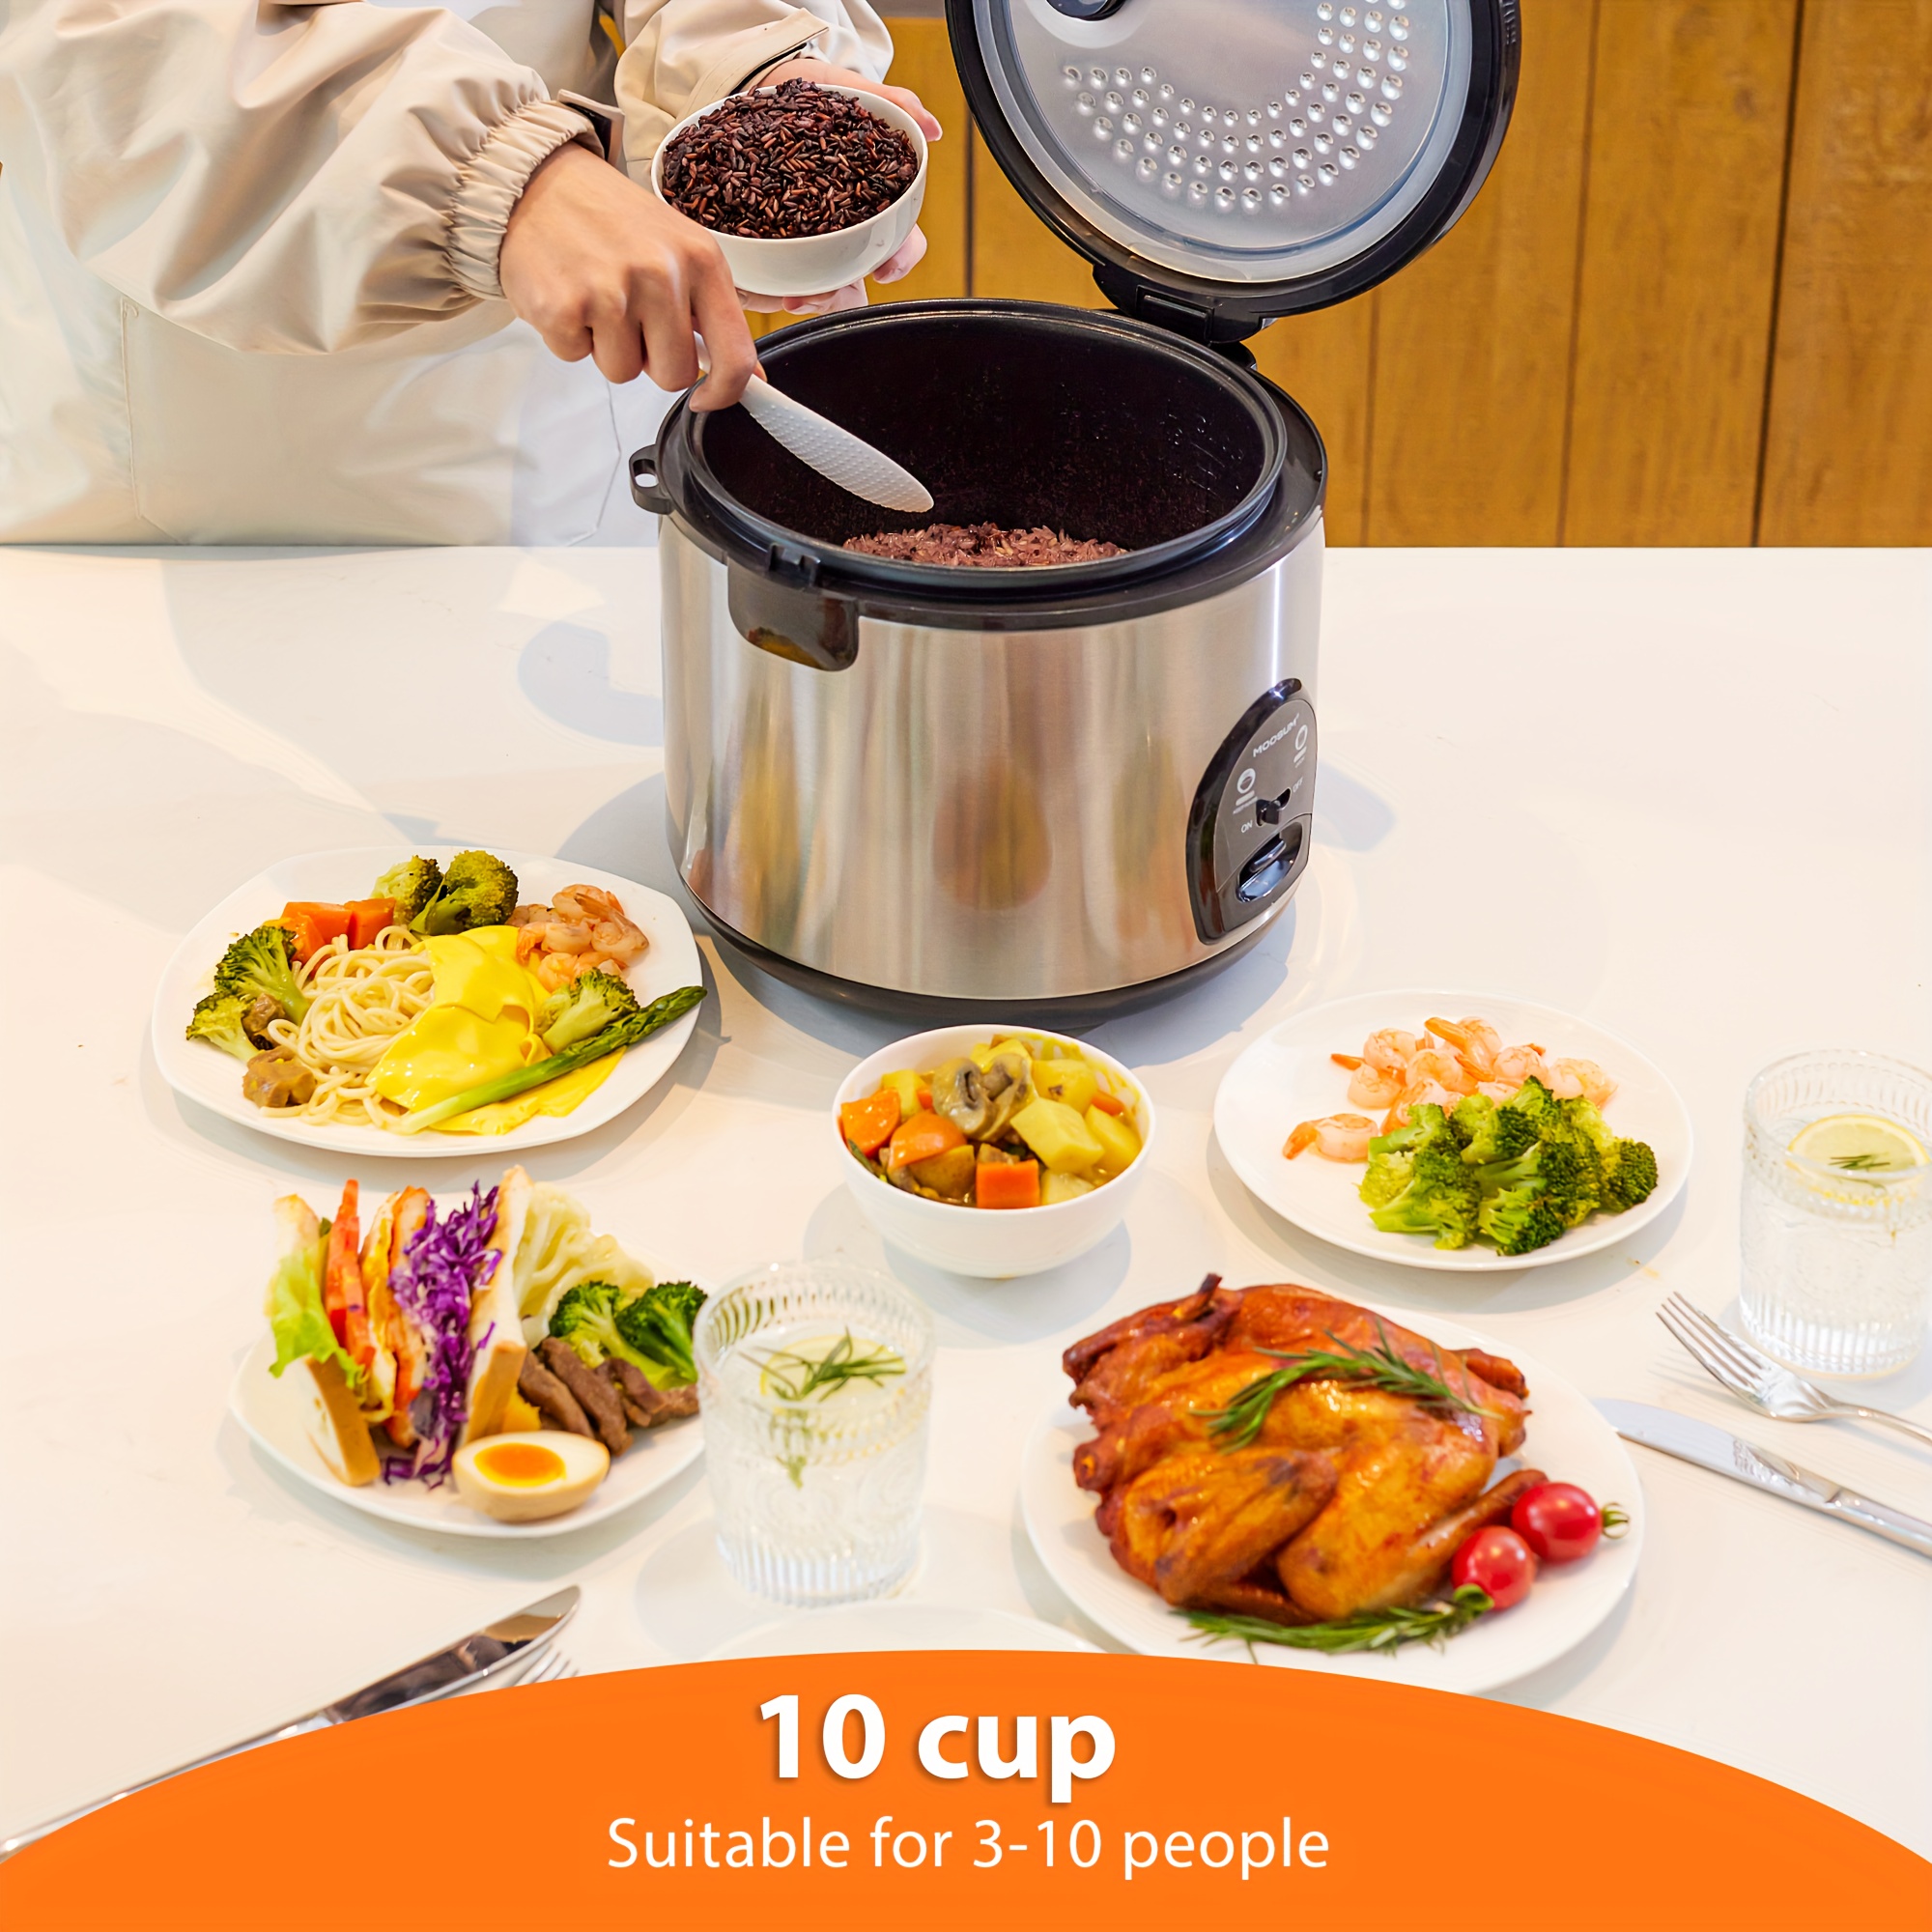  MOOSUM Electric Rice Cooker with One Touch for Asian Japanese  Sushi Rice, 3-cup Uncooked/6-cup Cooked, Fast&Convenient Cooker with  Ceramic Nonstick Coating inner pot, Auto Warmer: Home & Kitchen